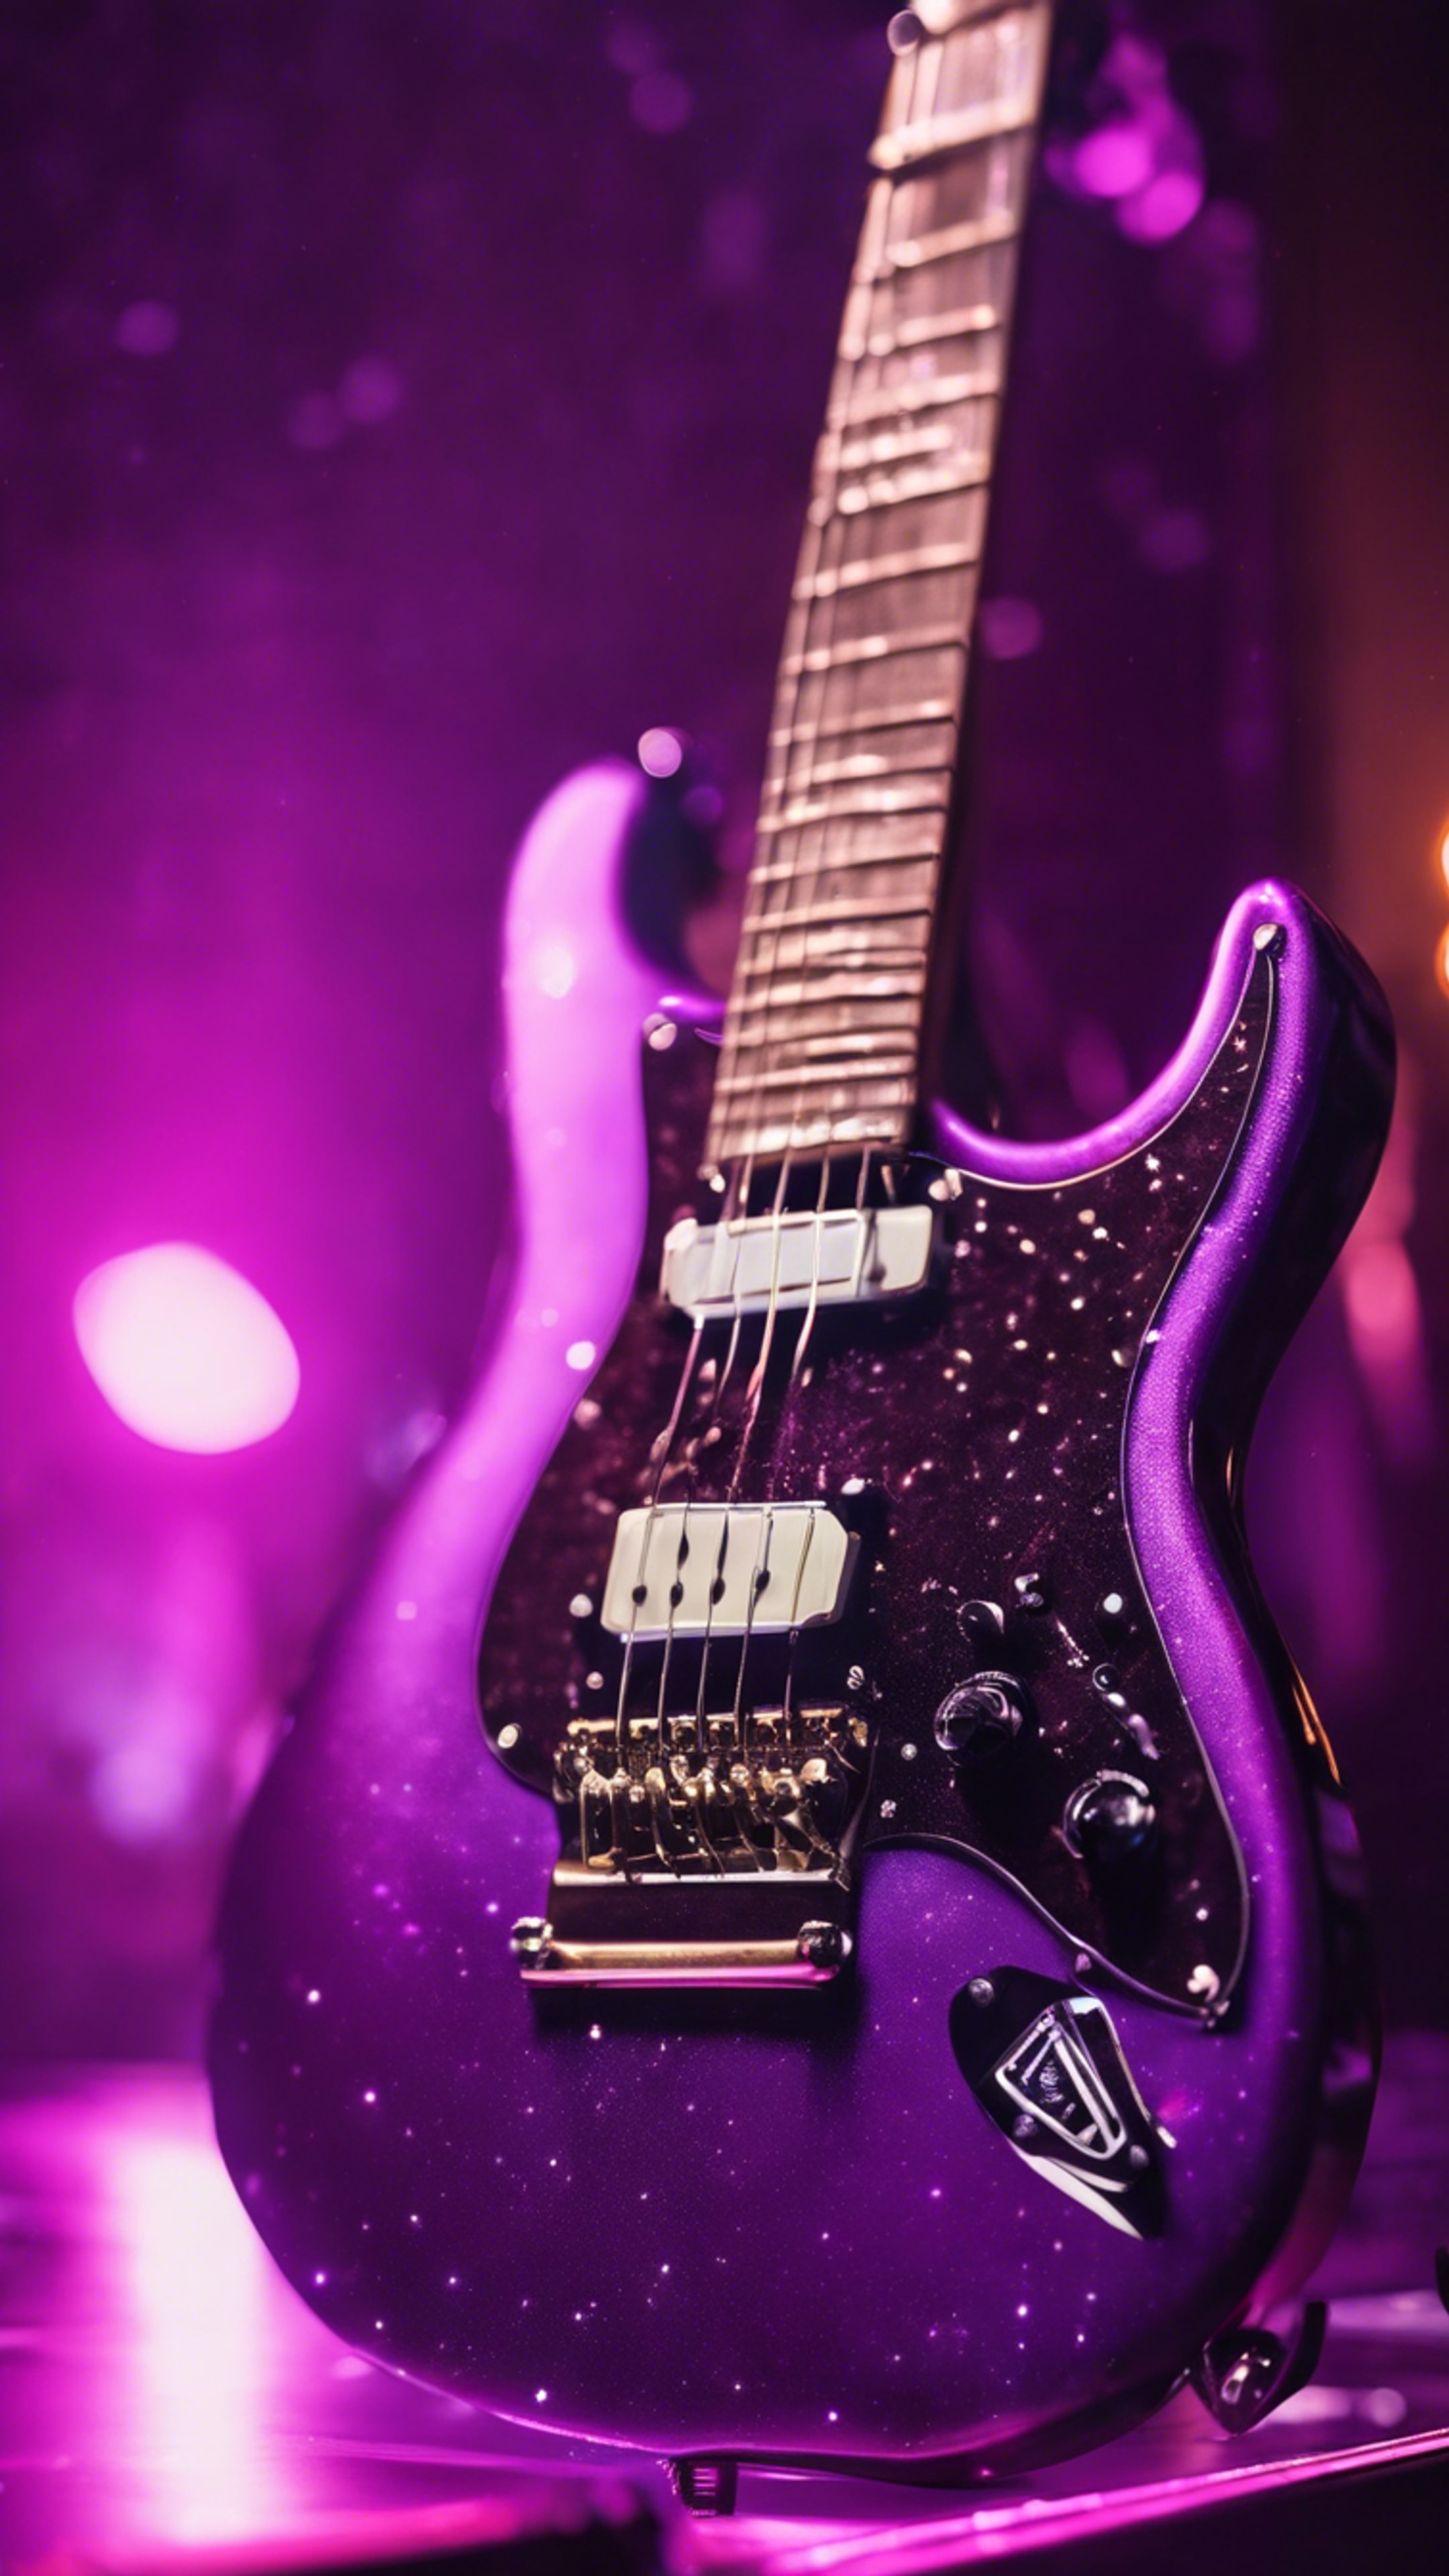 An electric guitar, finished in a glossy neon purple, under the cool stage lights of a concert. Ταπετσαρία[e32ffa723fc740a5910d]